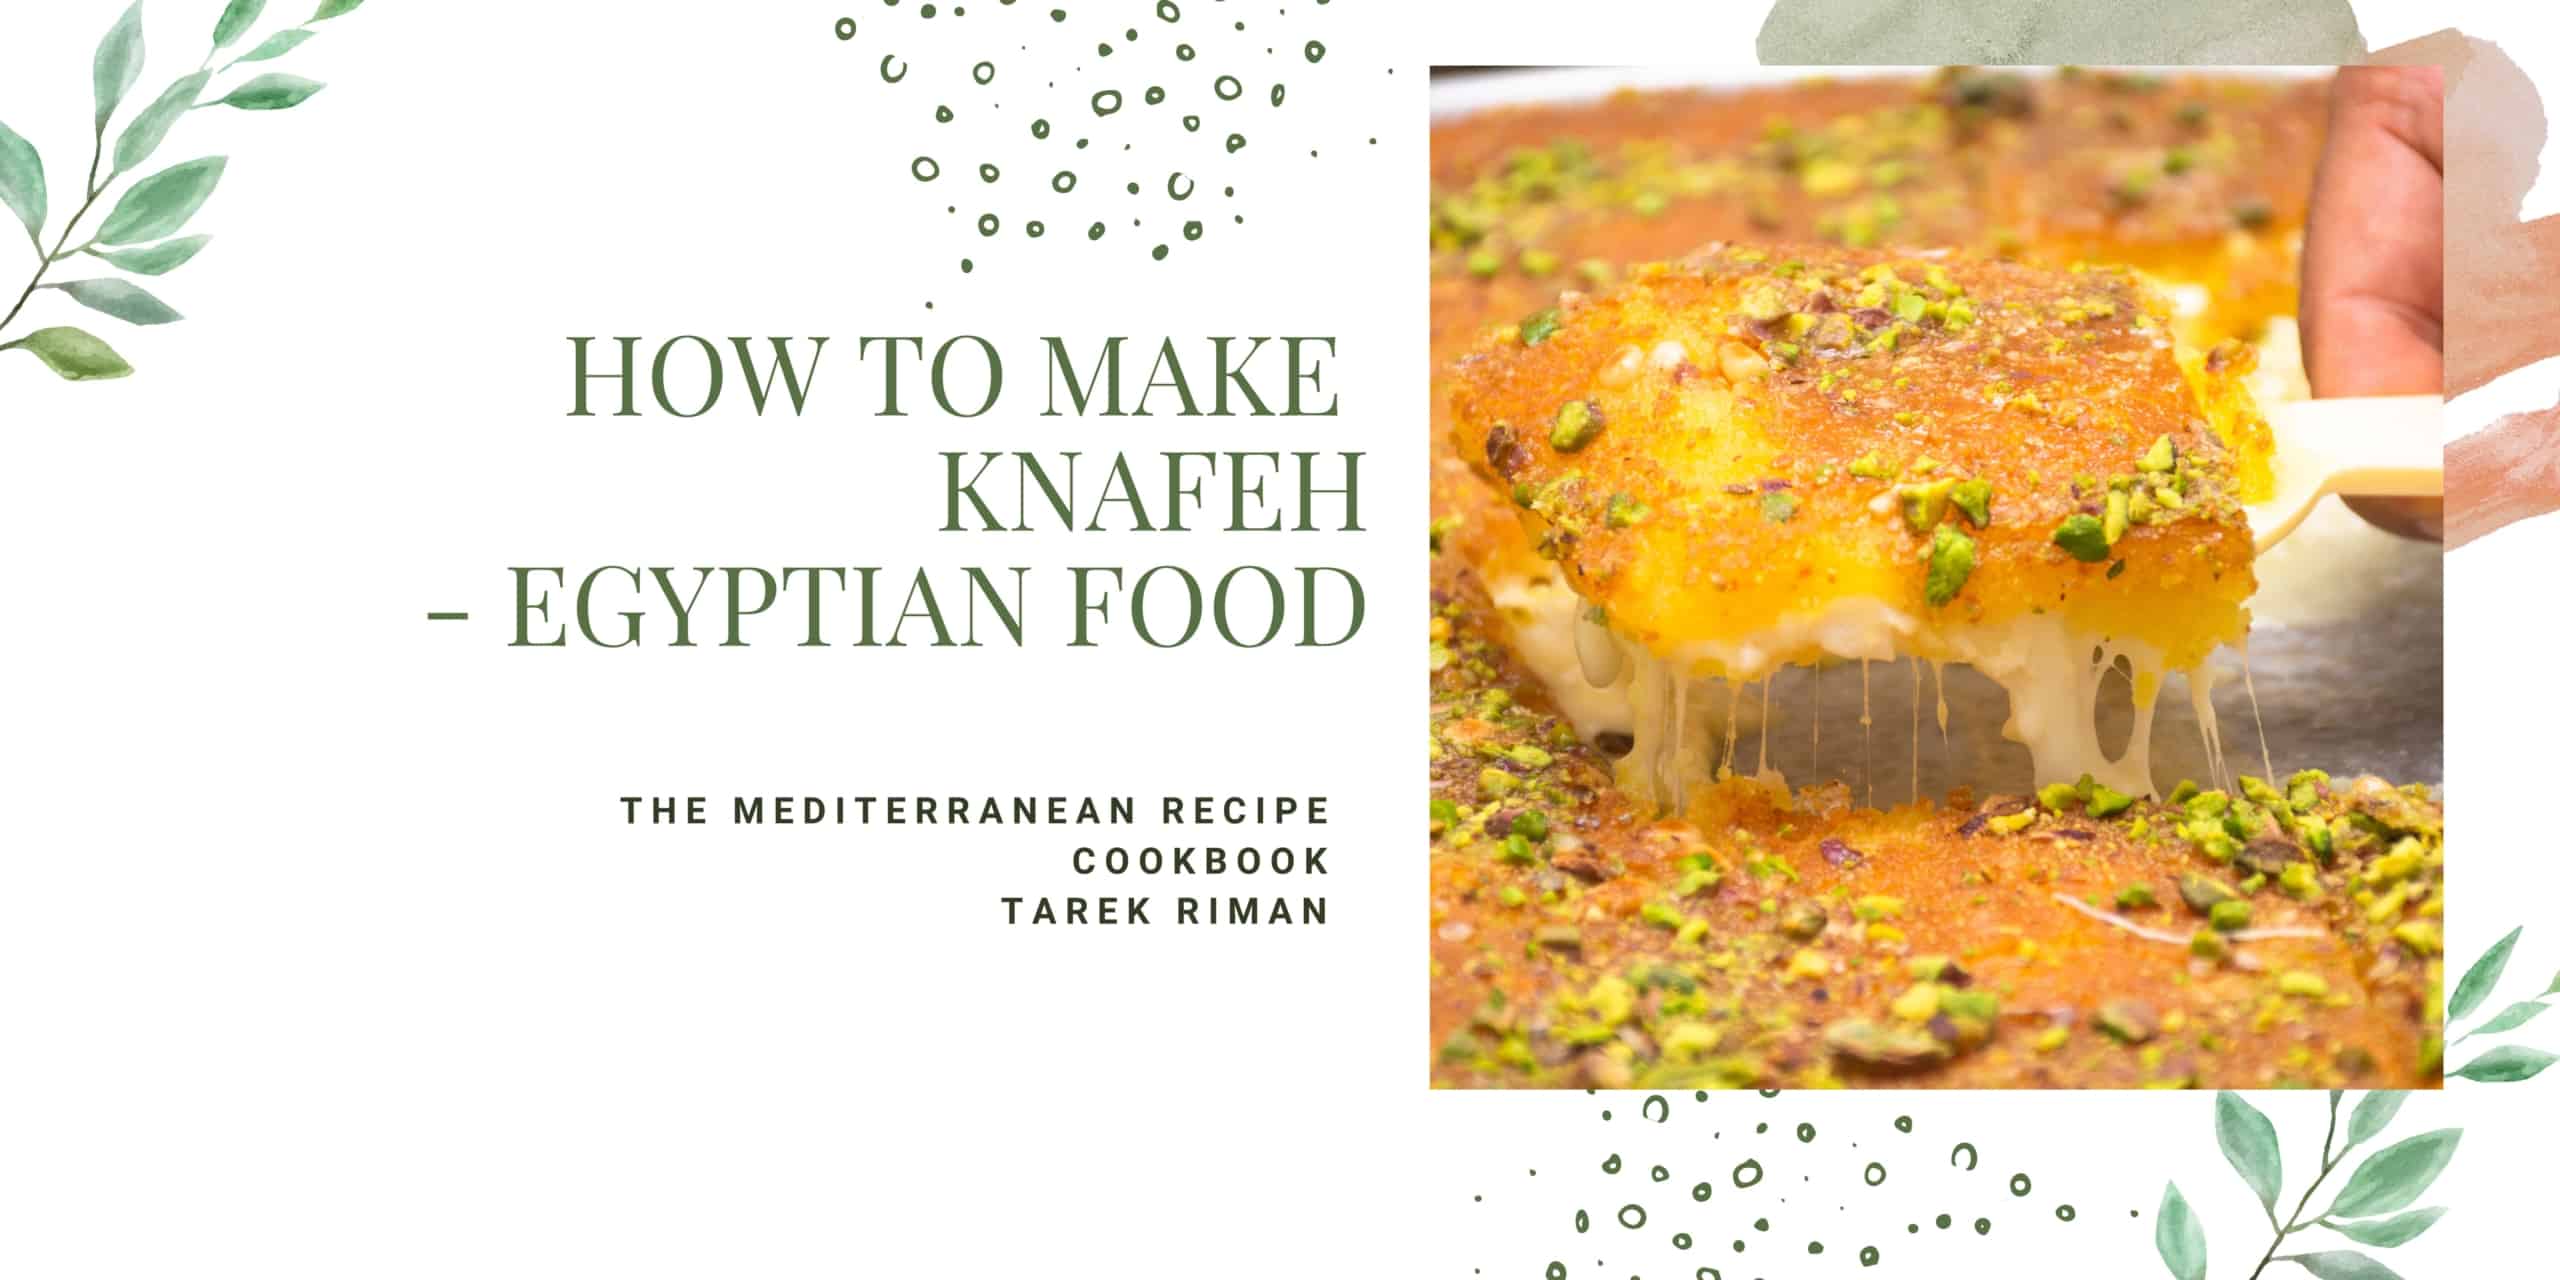 Knafeh is a famous Egyptian dessert prepared throughout the Middle East. You can find it in almost all Middle Eastern restaurants and consume it to satisfy your taste buds, thanks to the delicious, rich, sweet flavors of cheese and syrup. Let us get started with the Knafeh recipe. Read on!